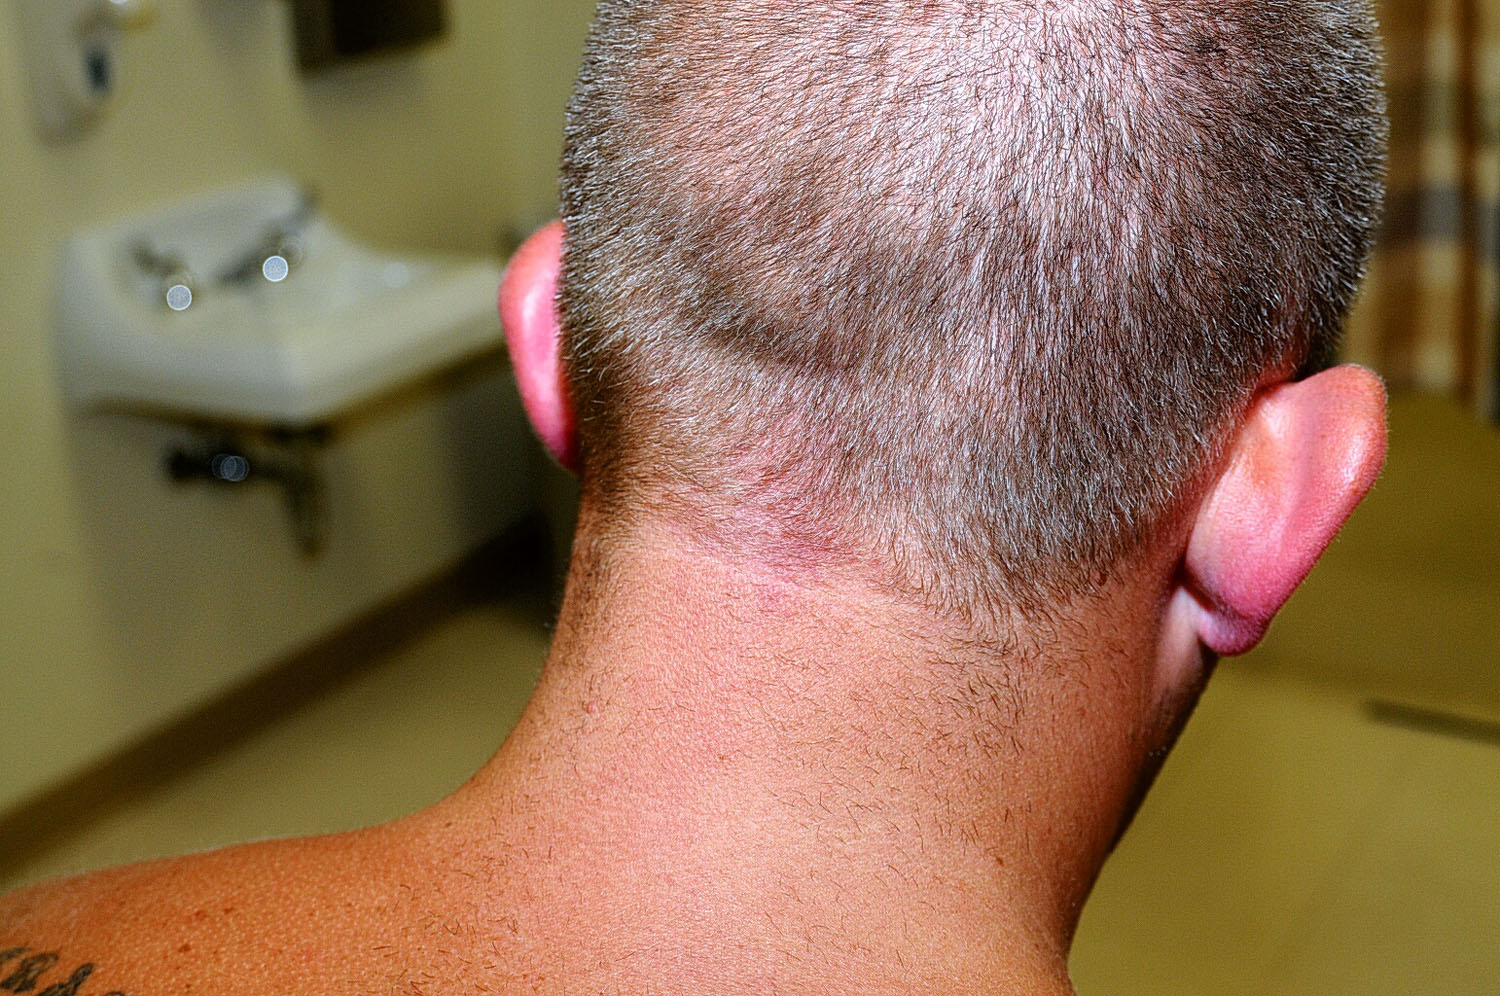 Medical examination also found cuts on the back of Officer Wilson's head